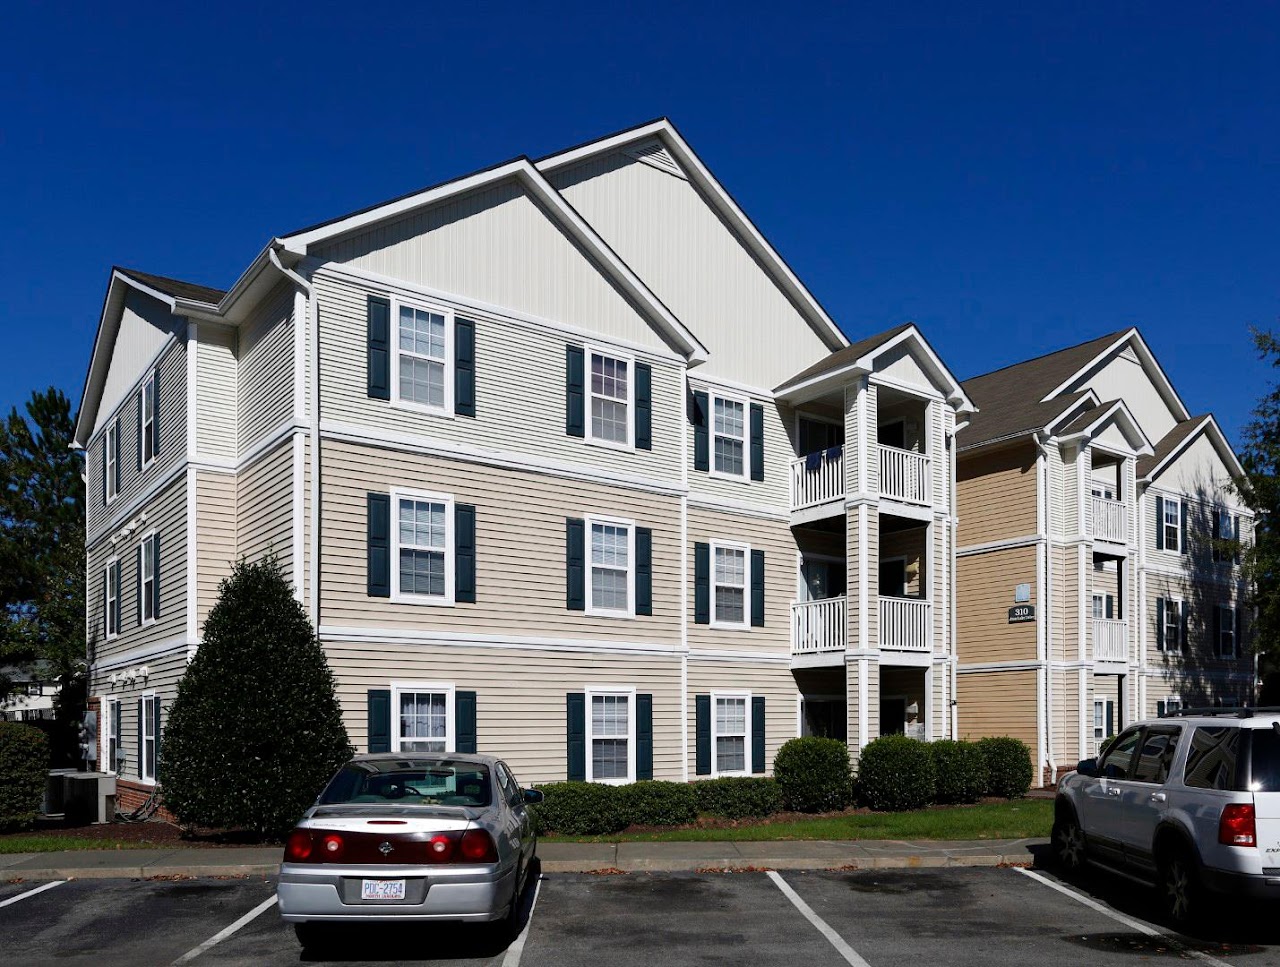 Photo of LAKEMOOR APTS. Affordable housing located at 205 KENT LAKE DRIVE DURHAM, NC 27713